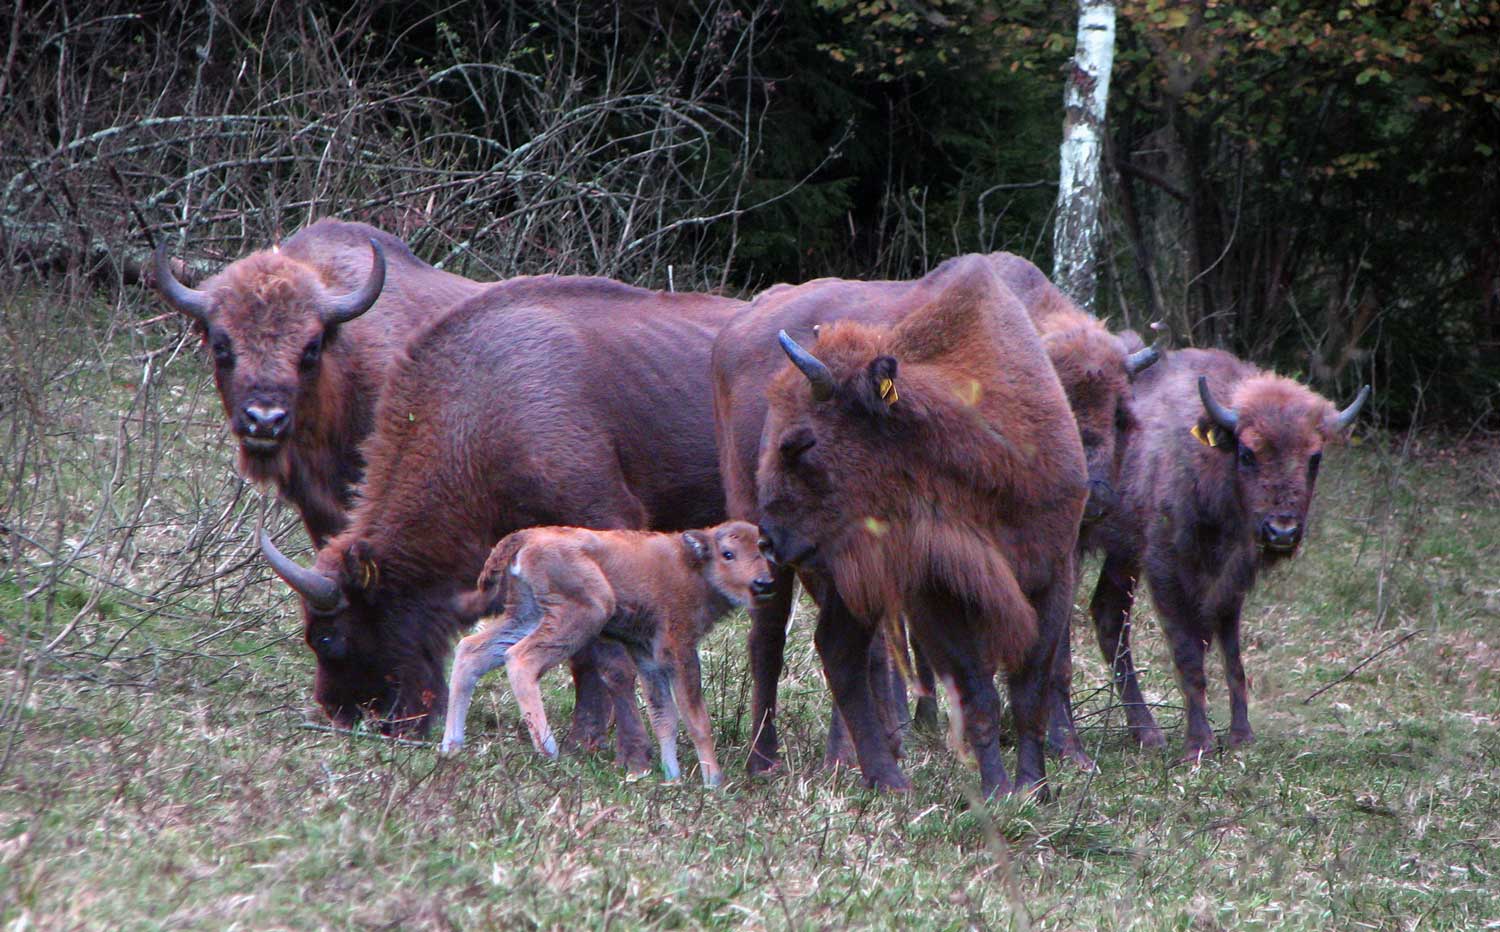 Six bison including one calf standing in front of a wooded background